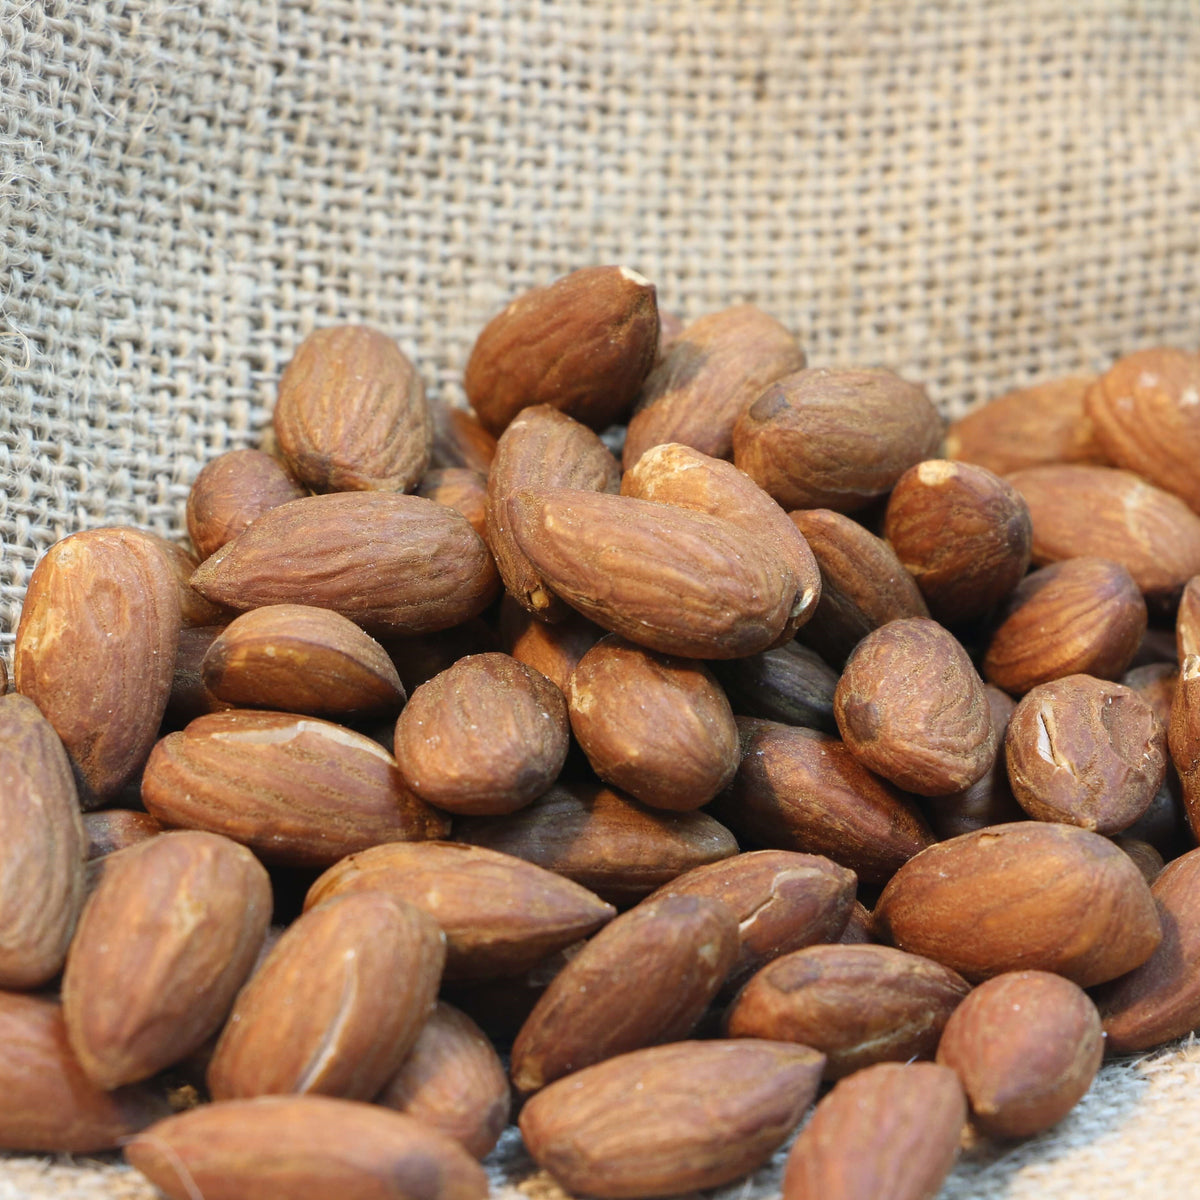 Almonds - Roasted Unsalted